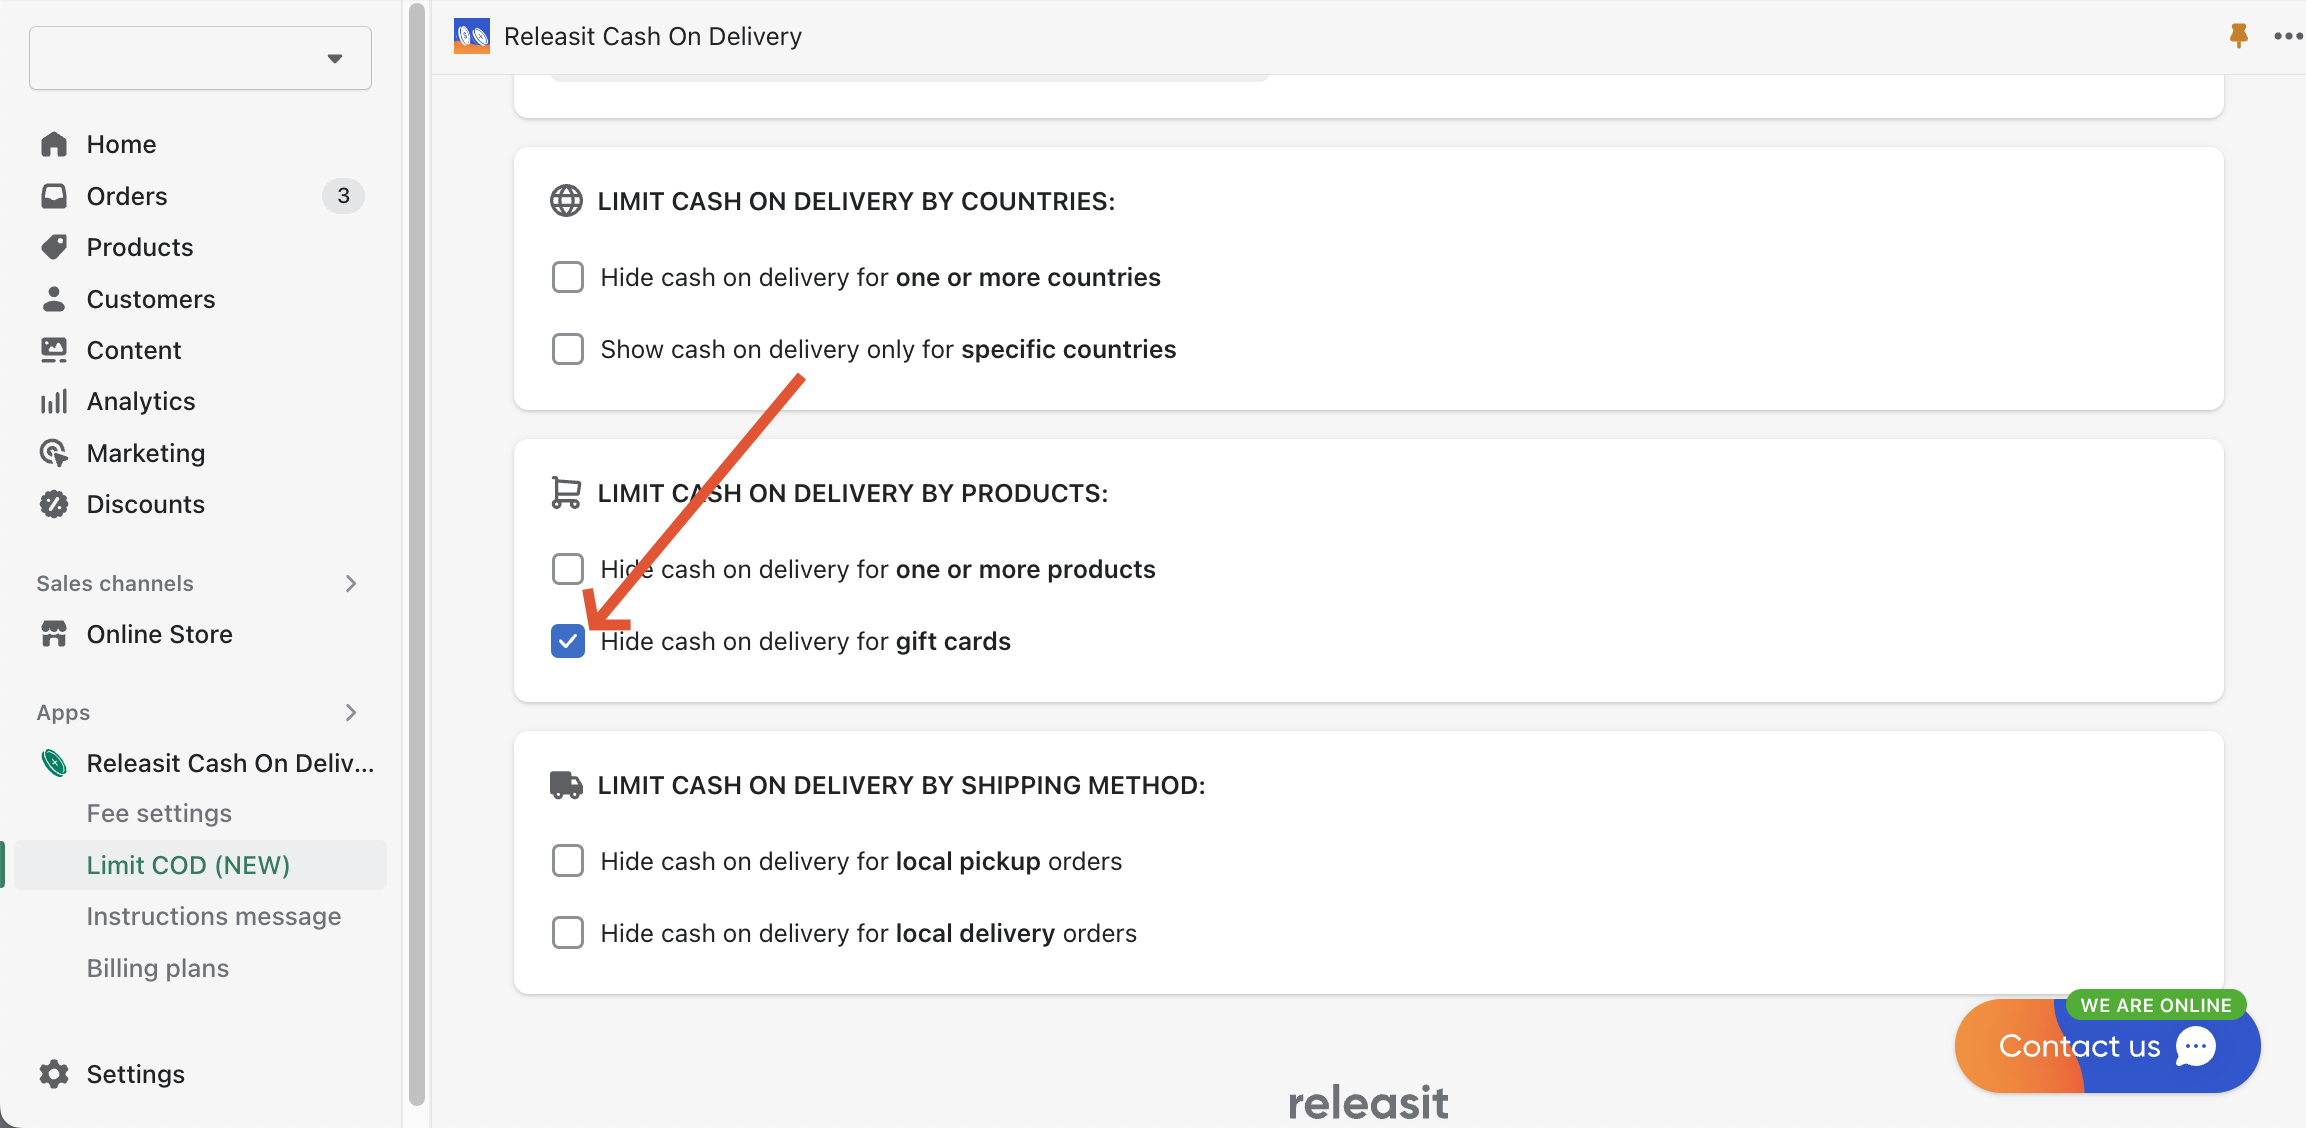 Releasit Cash On Delivery Limit COD page hide for gift cards